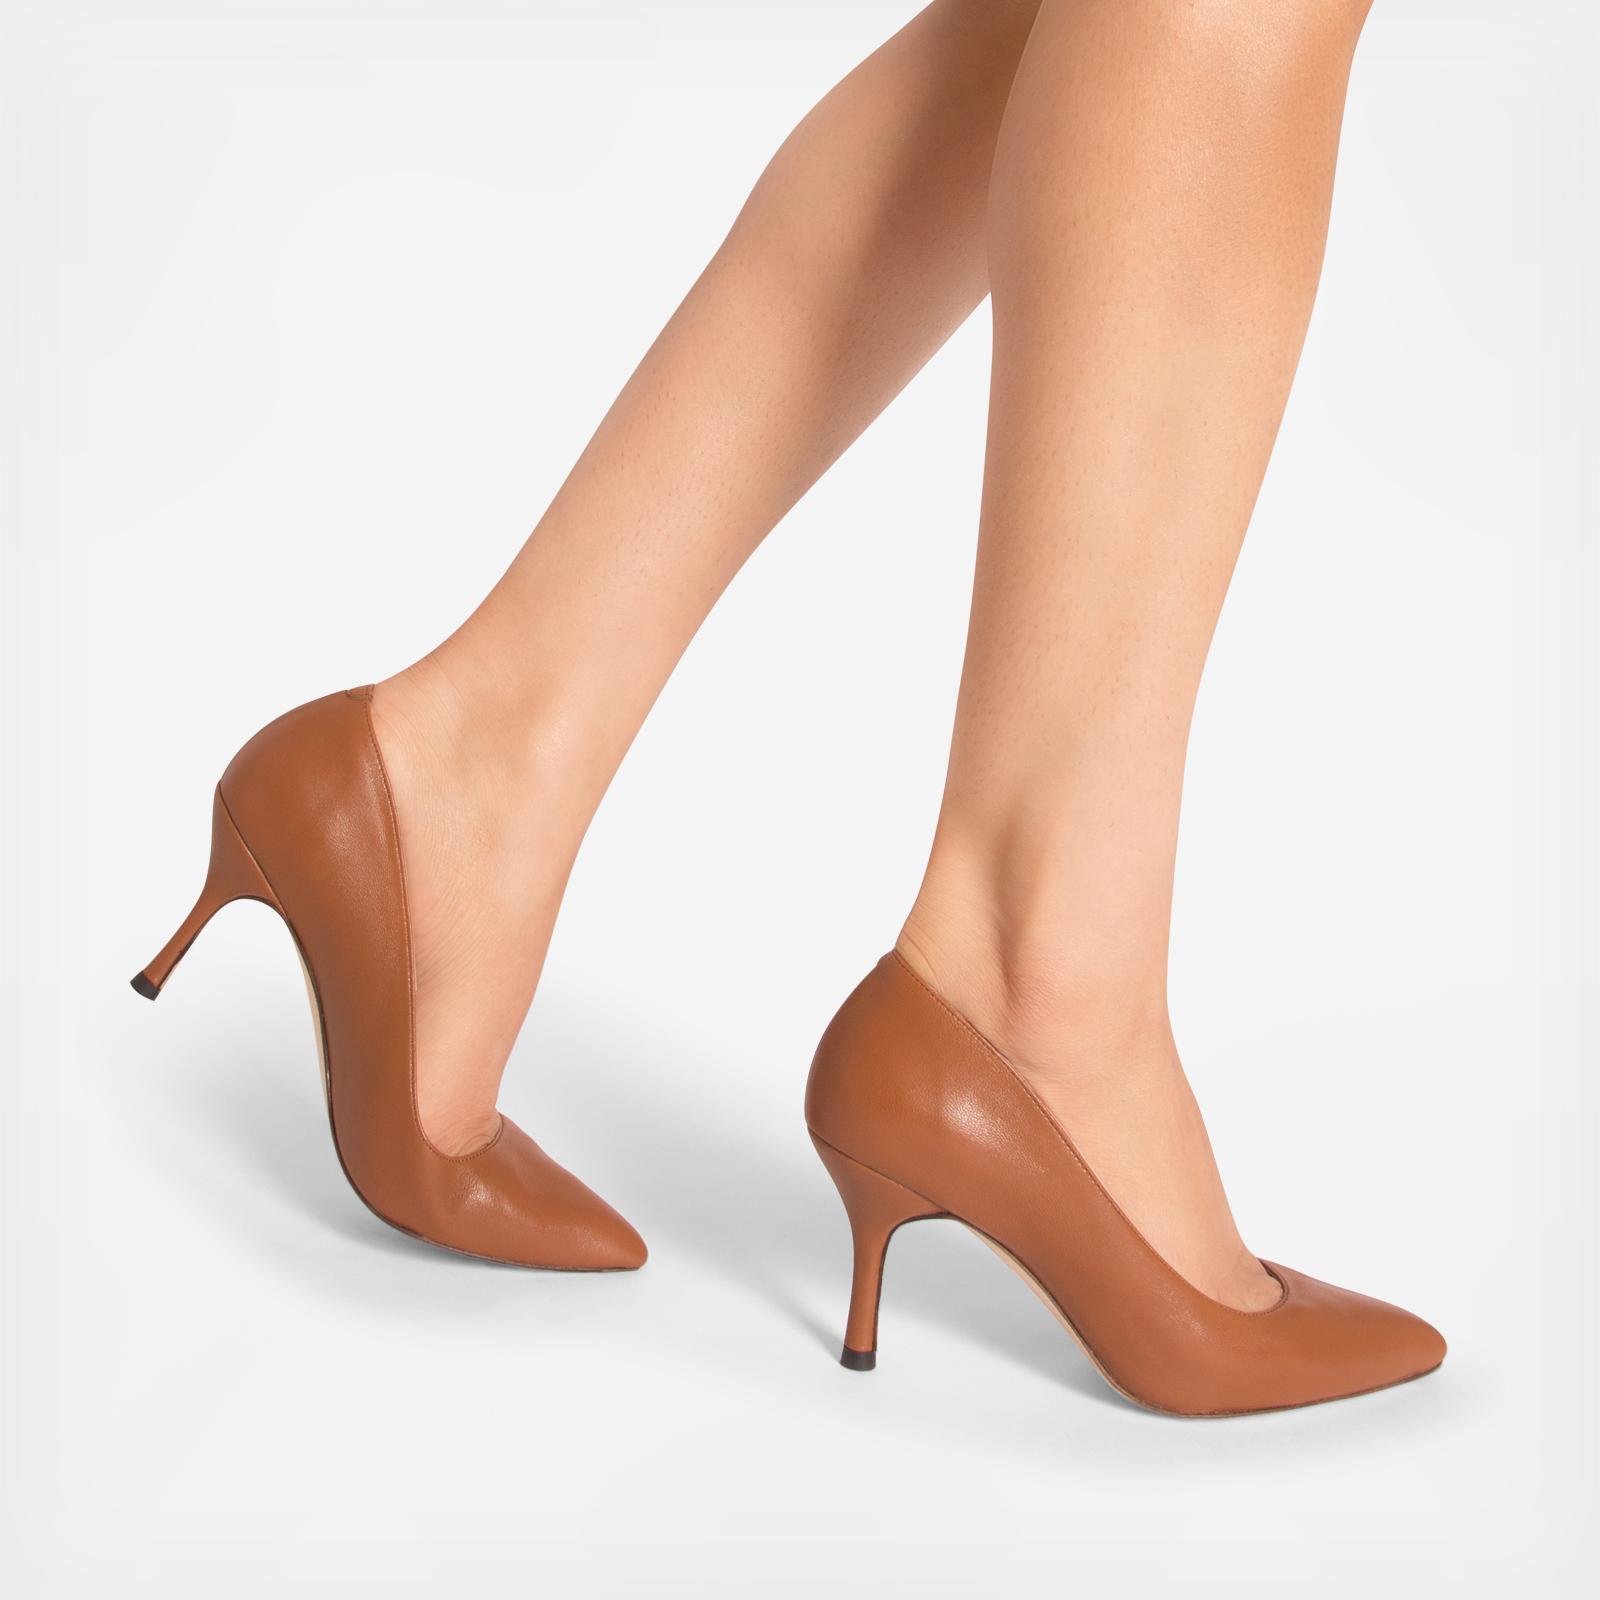 ALLY Shoes, Courageous Caramel Leather 